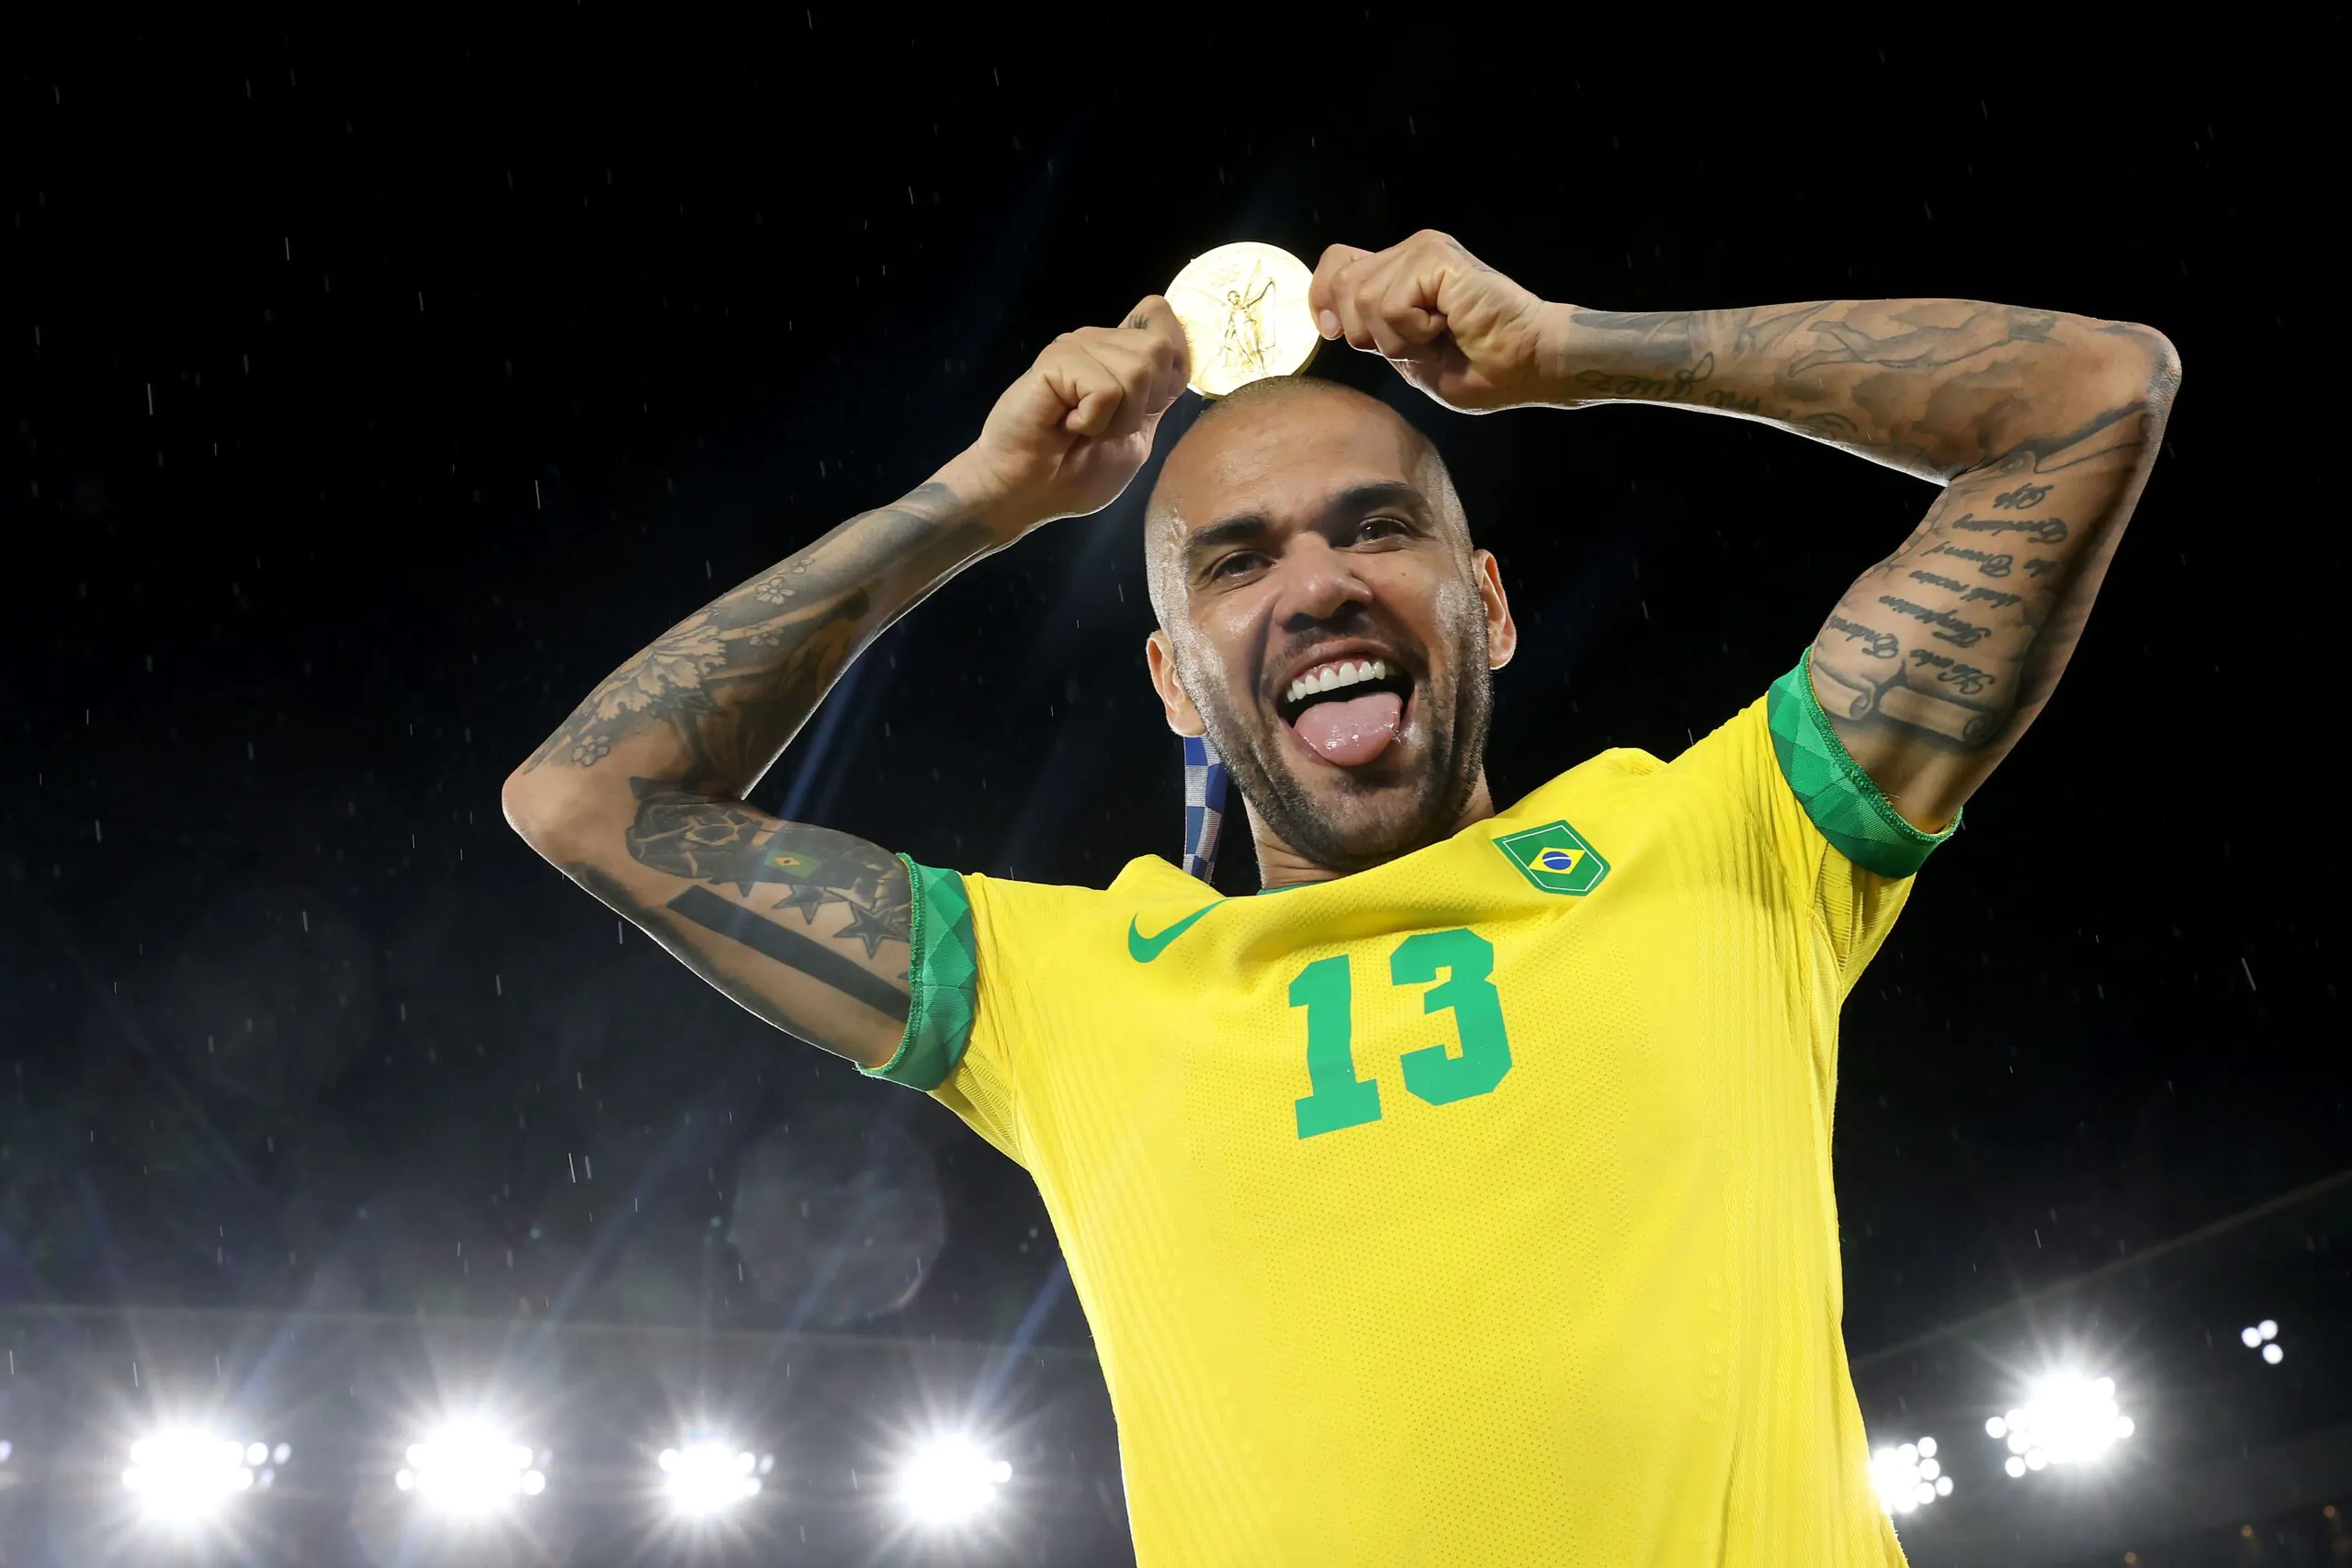 Dani Alves has been called up by Brazil for the World Cup despite being 39. He explained his role and weighed in on his teammates and his time at Juventus.